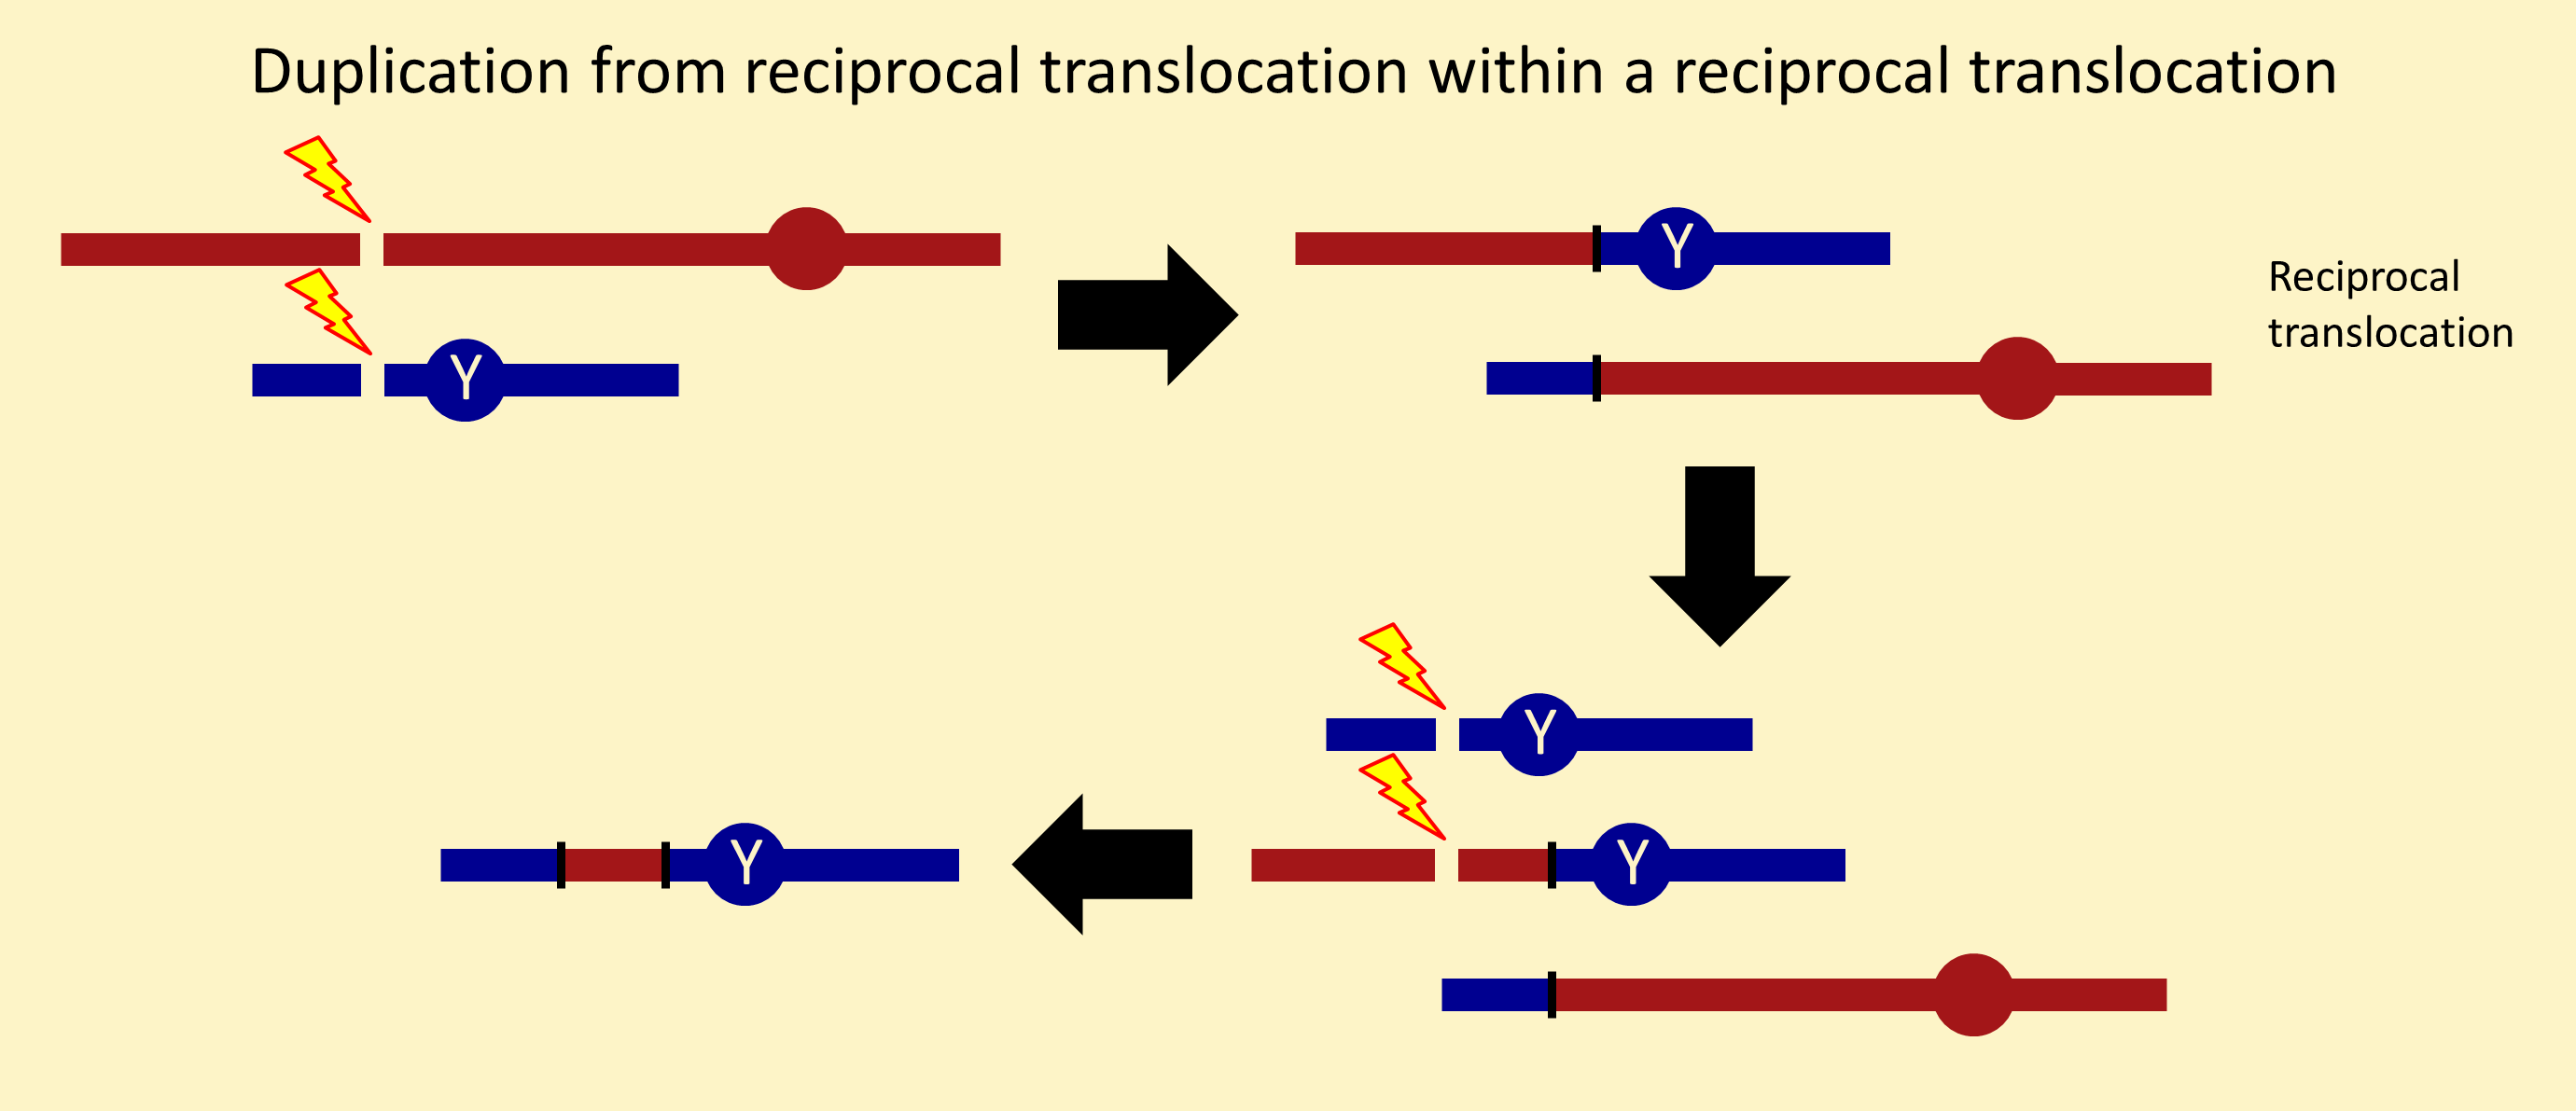  Y-linked duplication from two reciprocal translocations